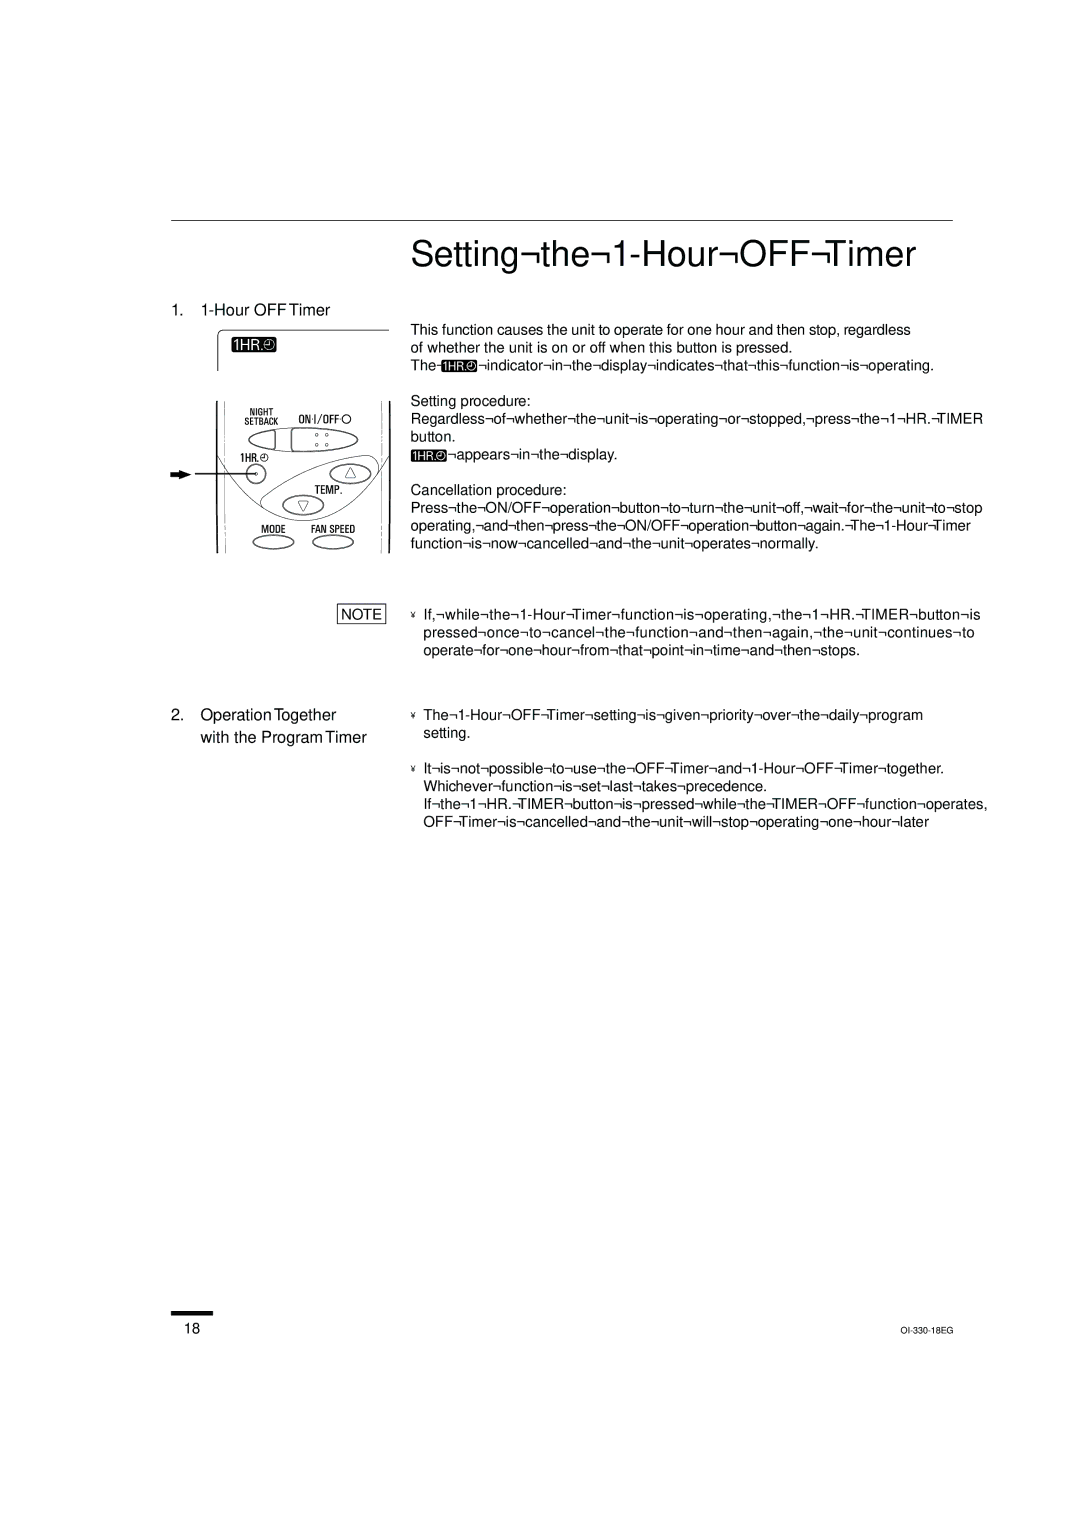 Sanyo KS0951 Setting the 1-Hour OFFTimer, Hour OFF Timer Operation Together with the Program Timer, Setting procedure 